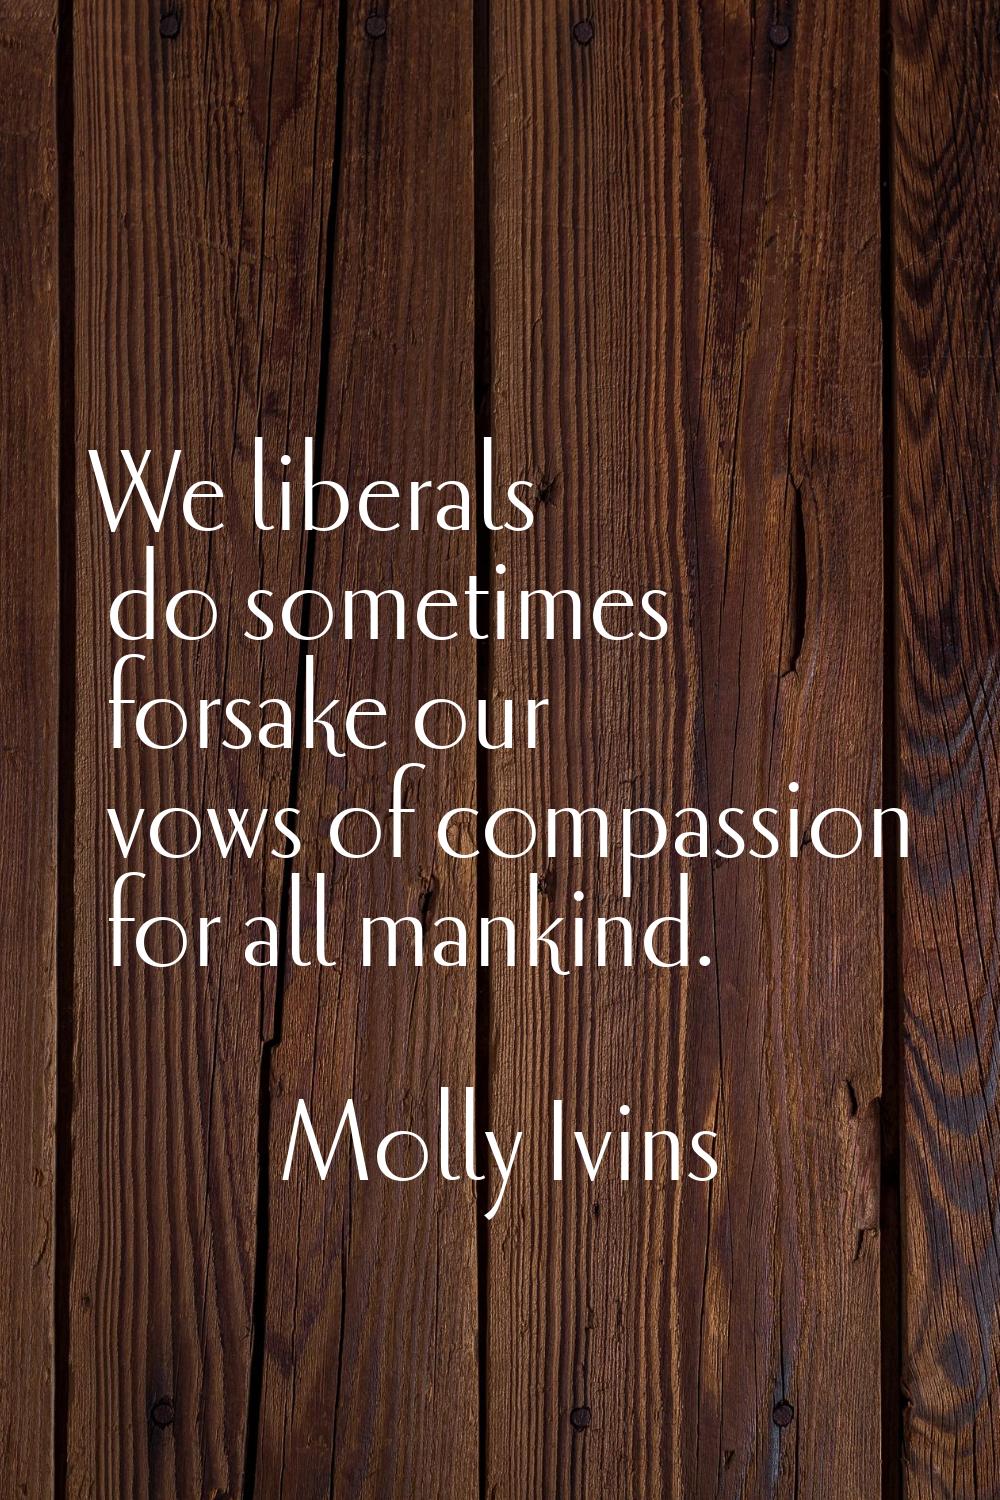 We liberals do sometimes forsake our vows of compassion for all mankind.